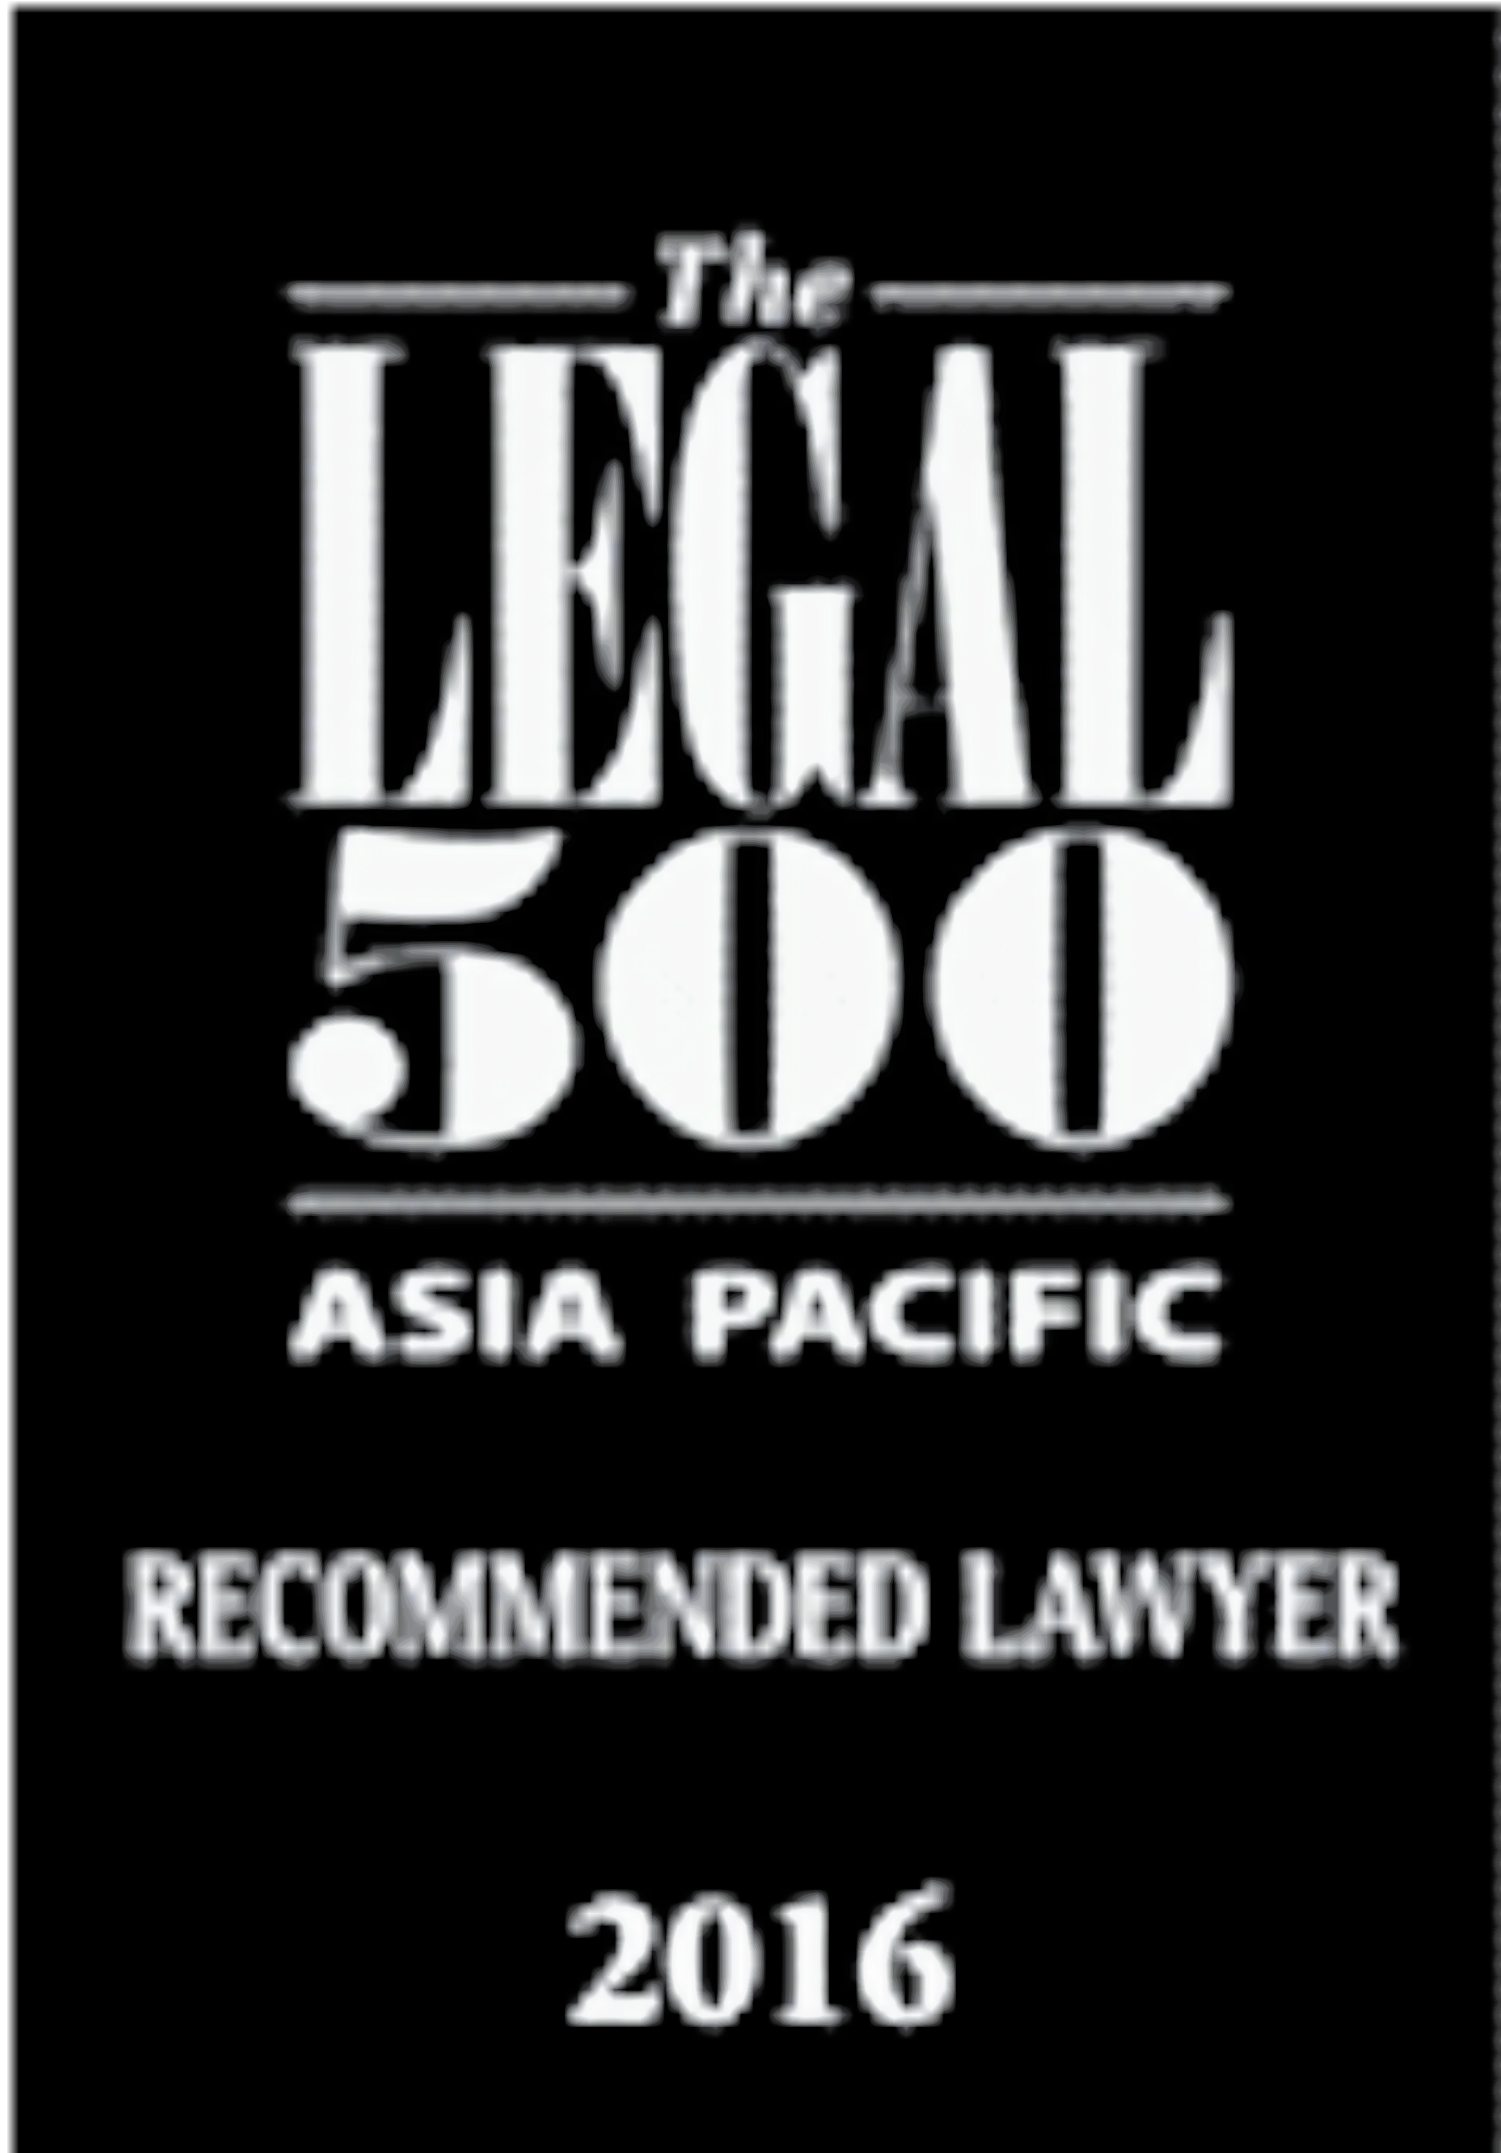 Recommended Lawyer in Tax and Trusts (Hong Kong) by Legal 500 Asia Pacific, 2016